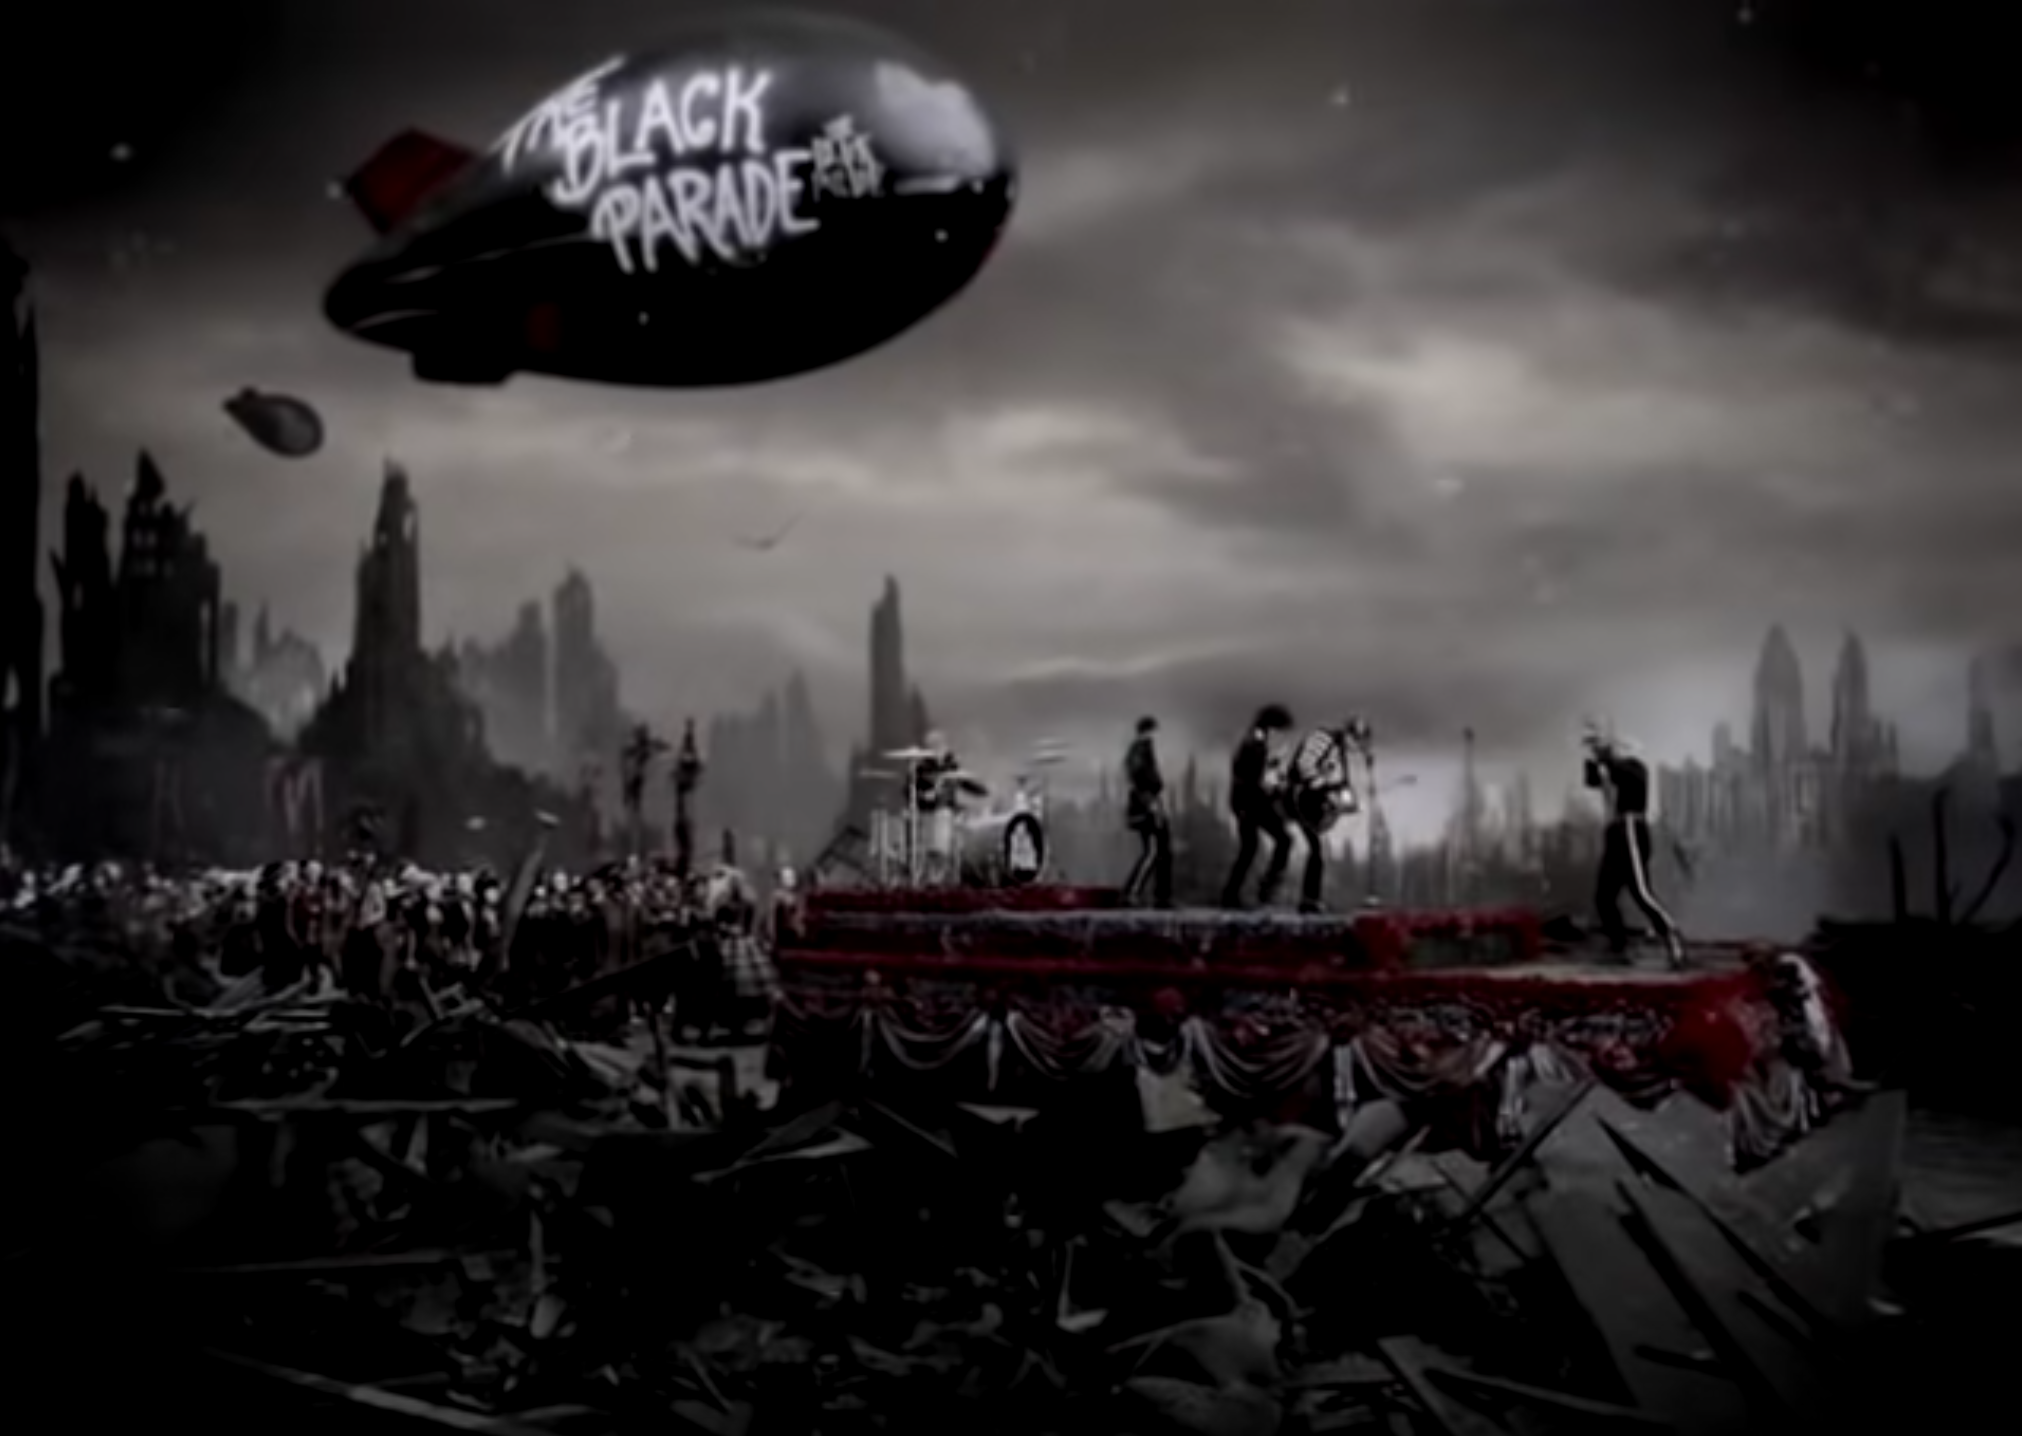 My Chemical Romance - Welcome To The Black Parade [Official Music Video]  [HD] 